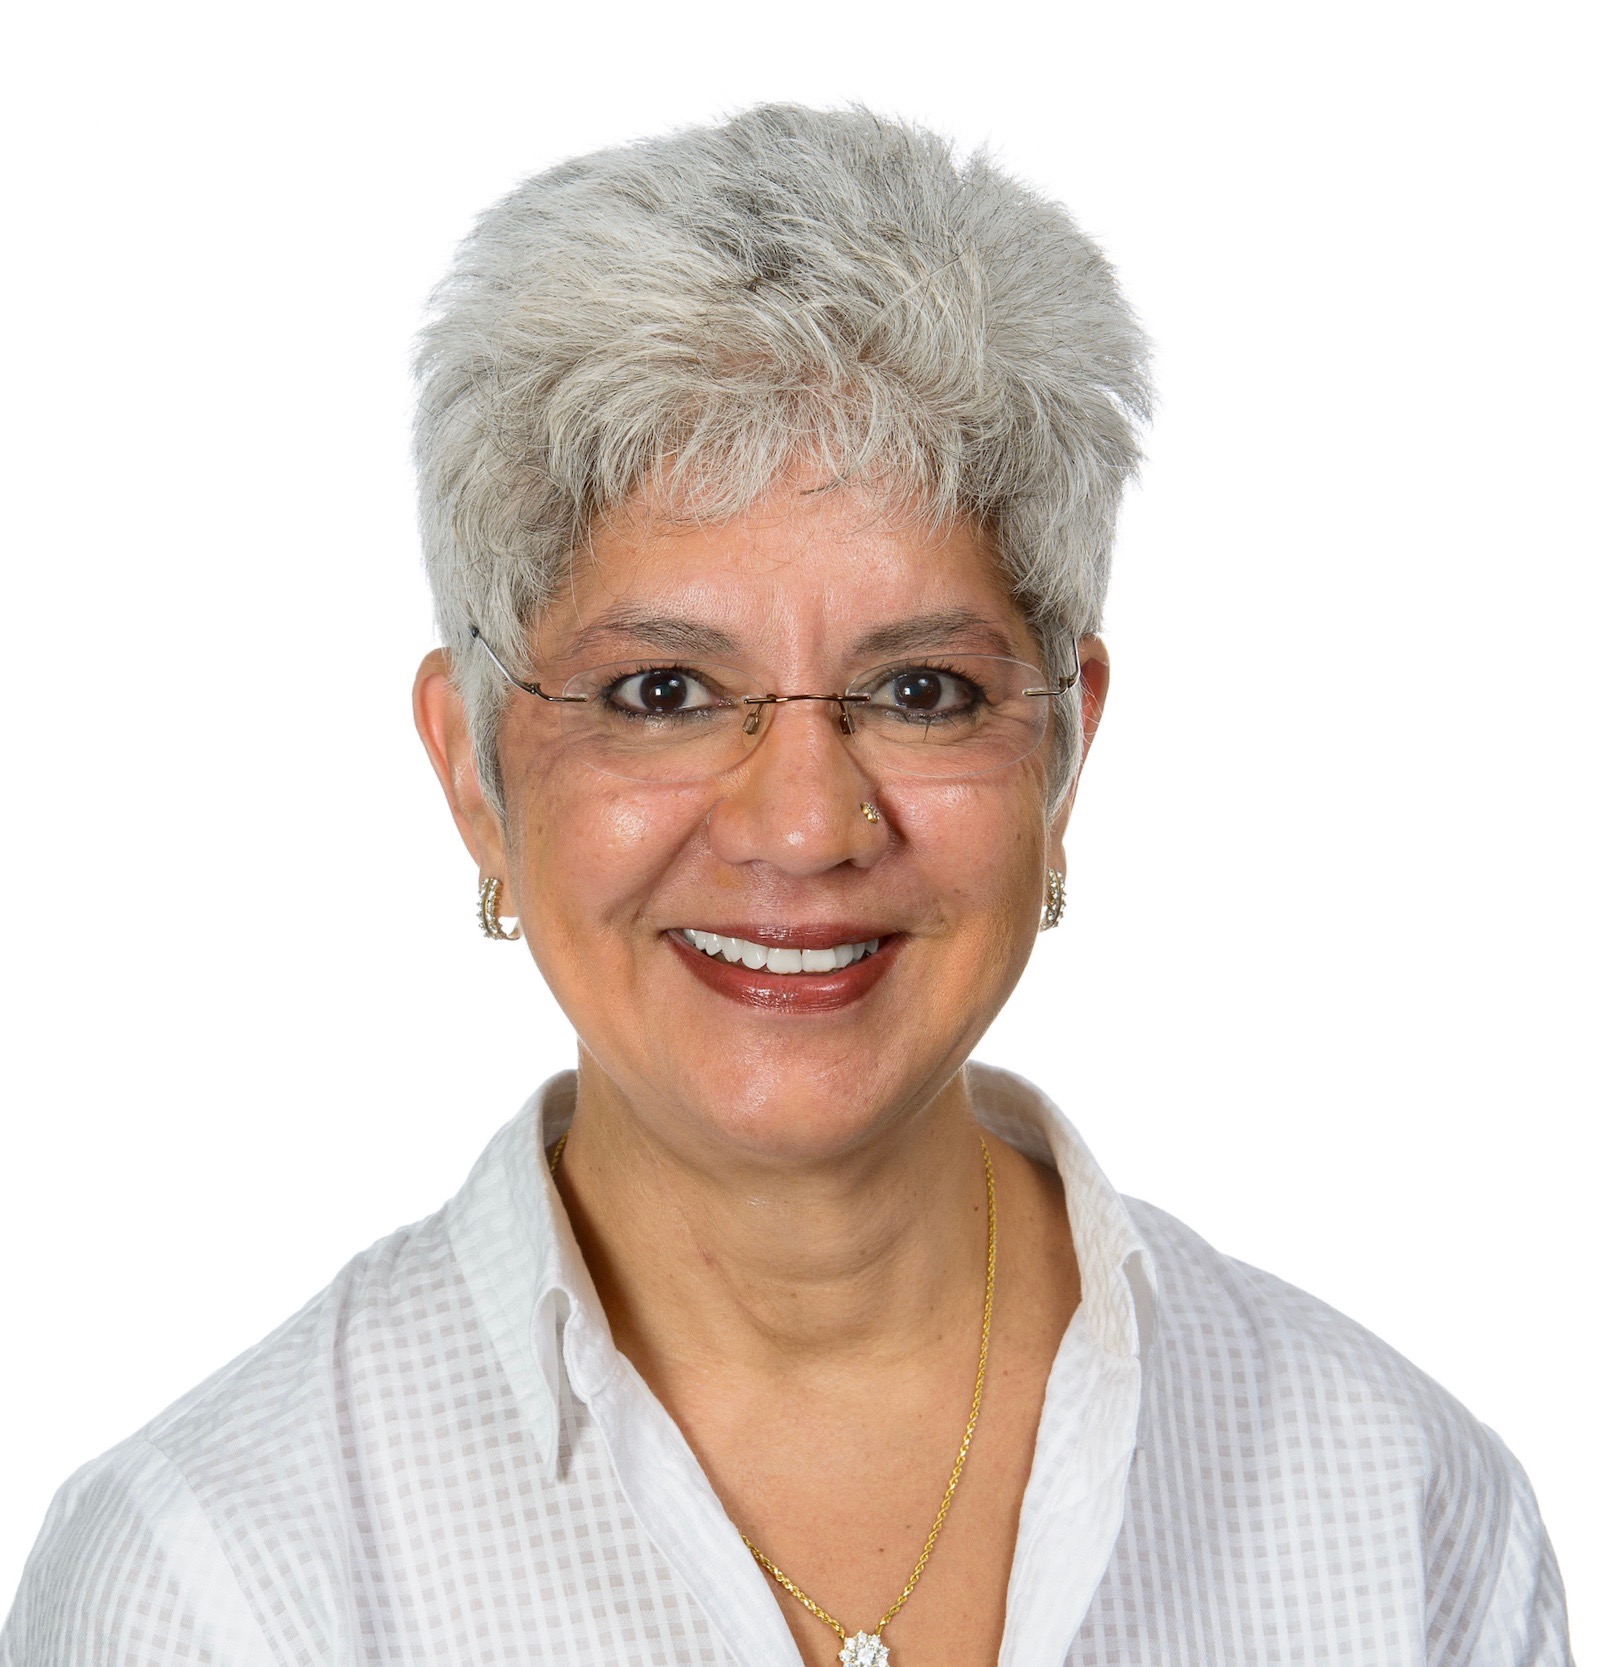 Woman in grey hair and glasses smiling